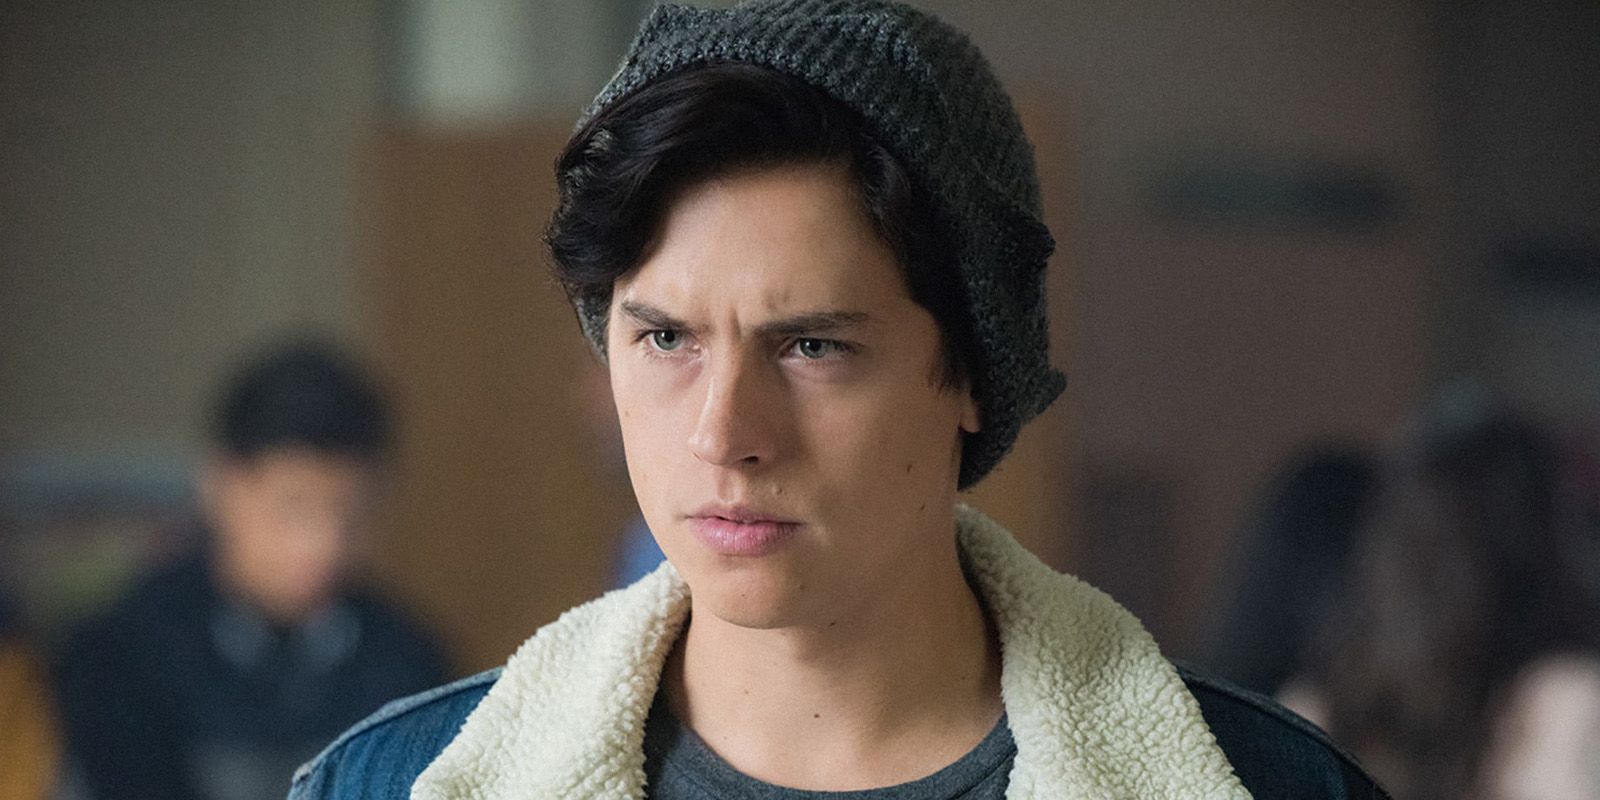 Jughead frowning in Riverdale